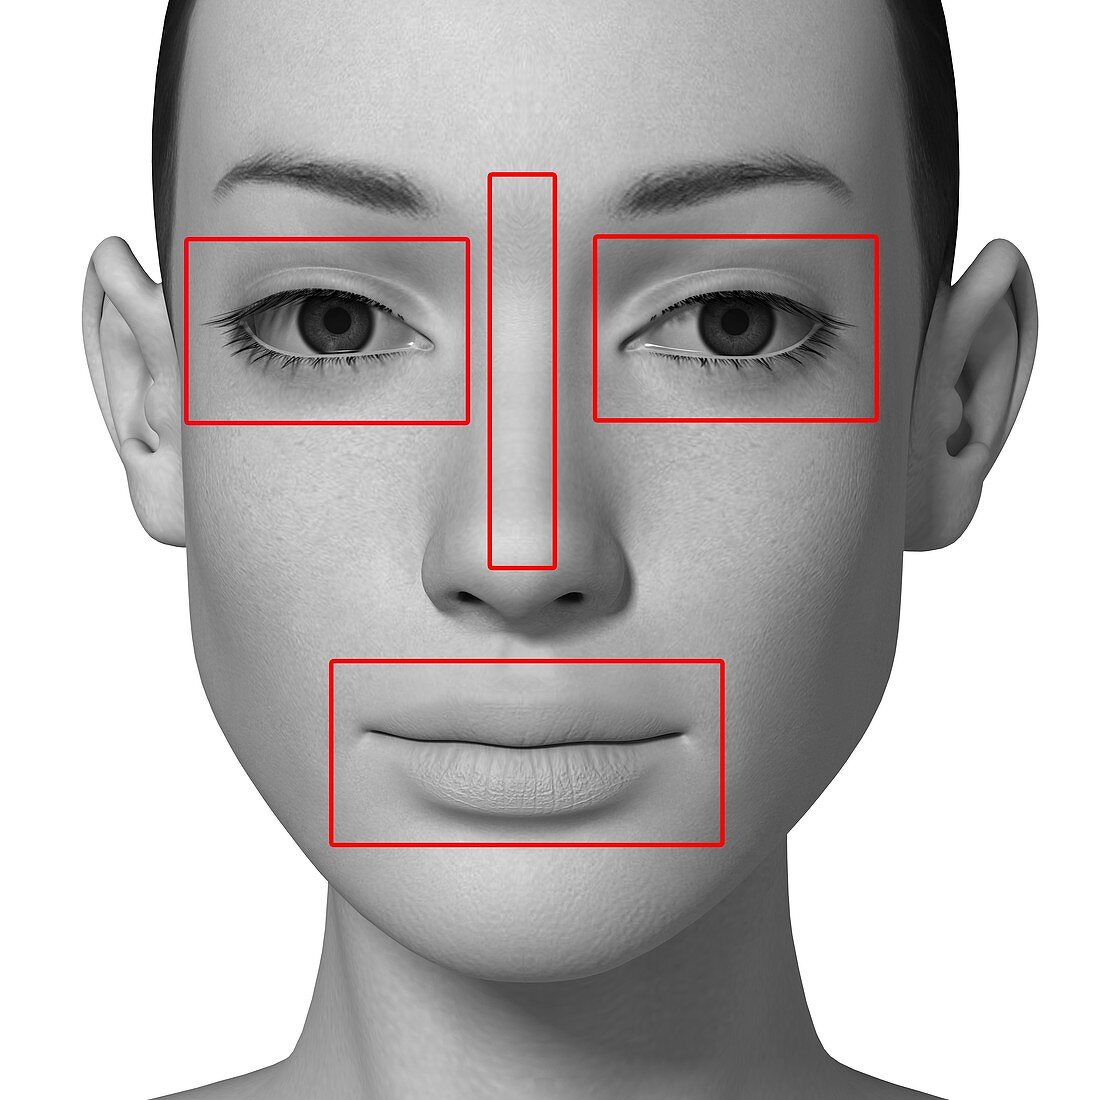 Female head with biometric markers